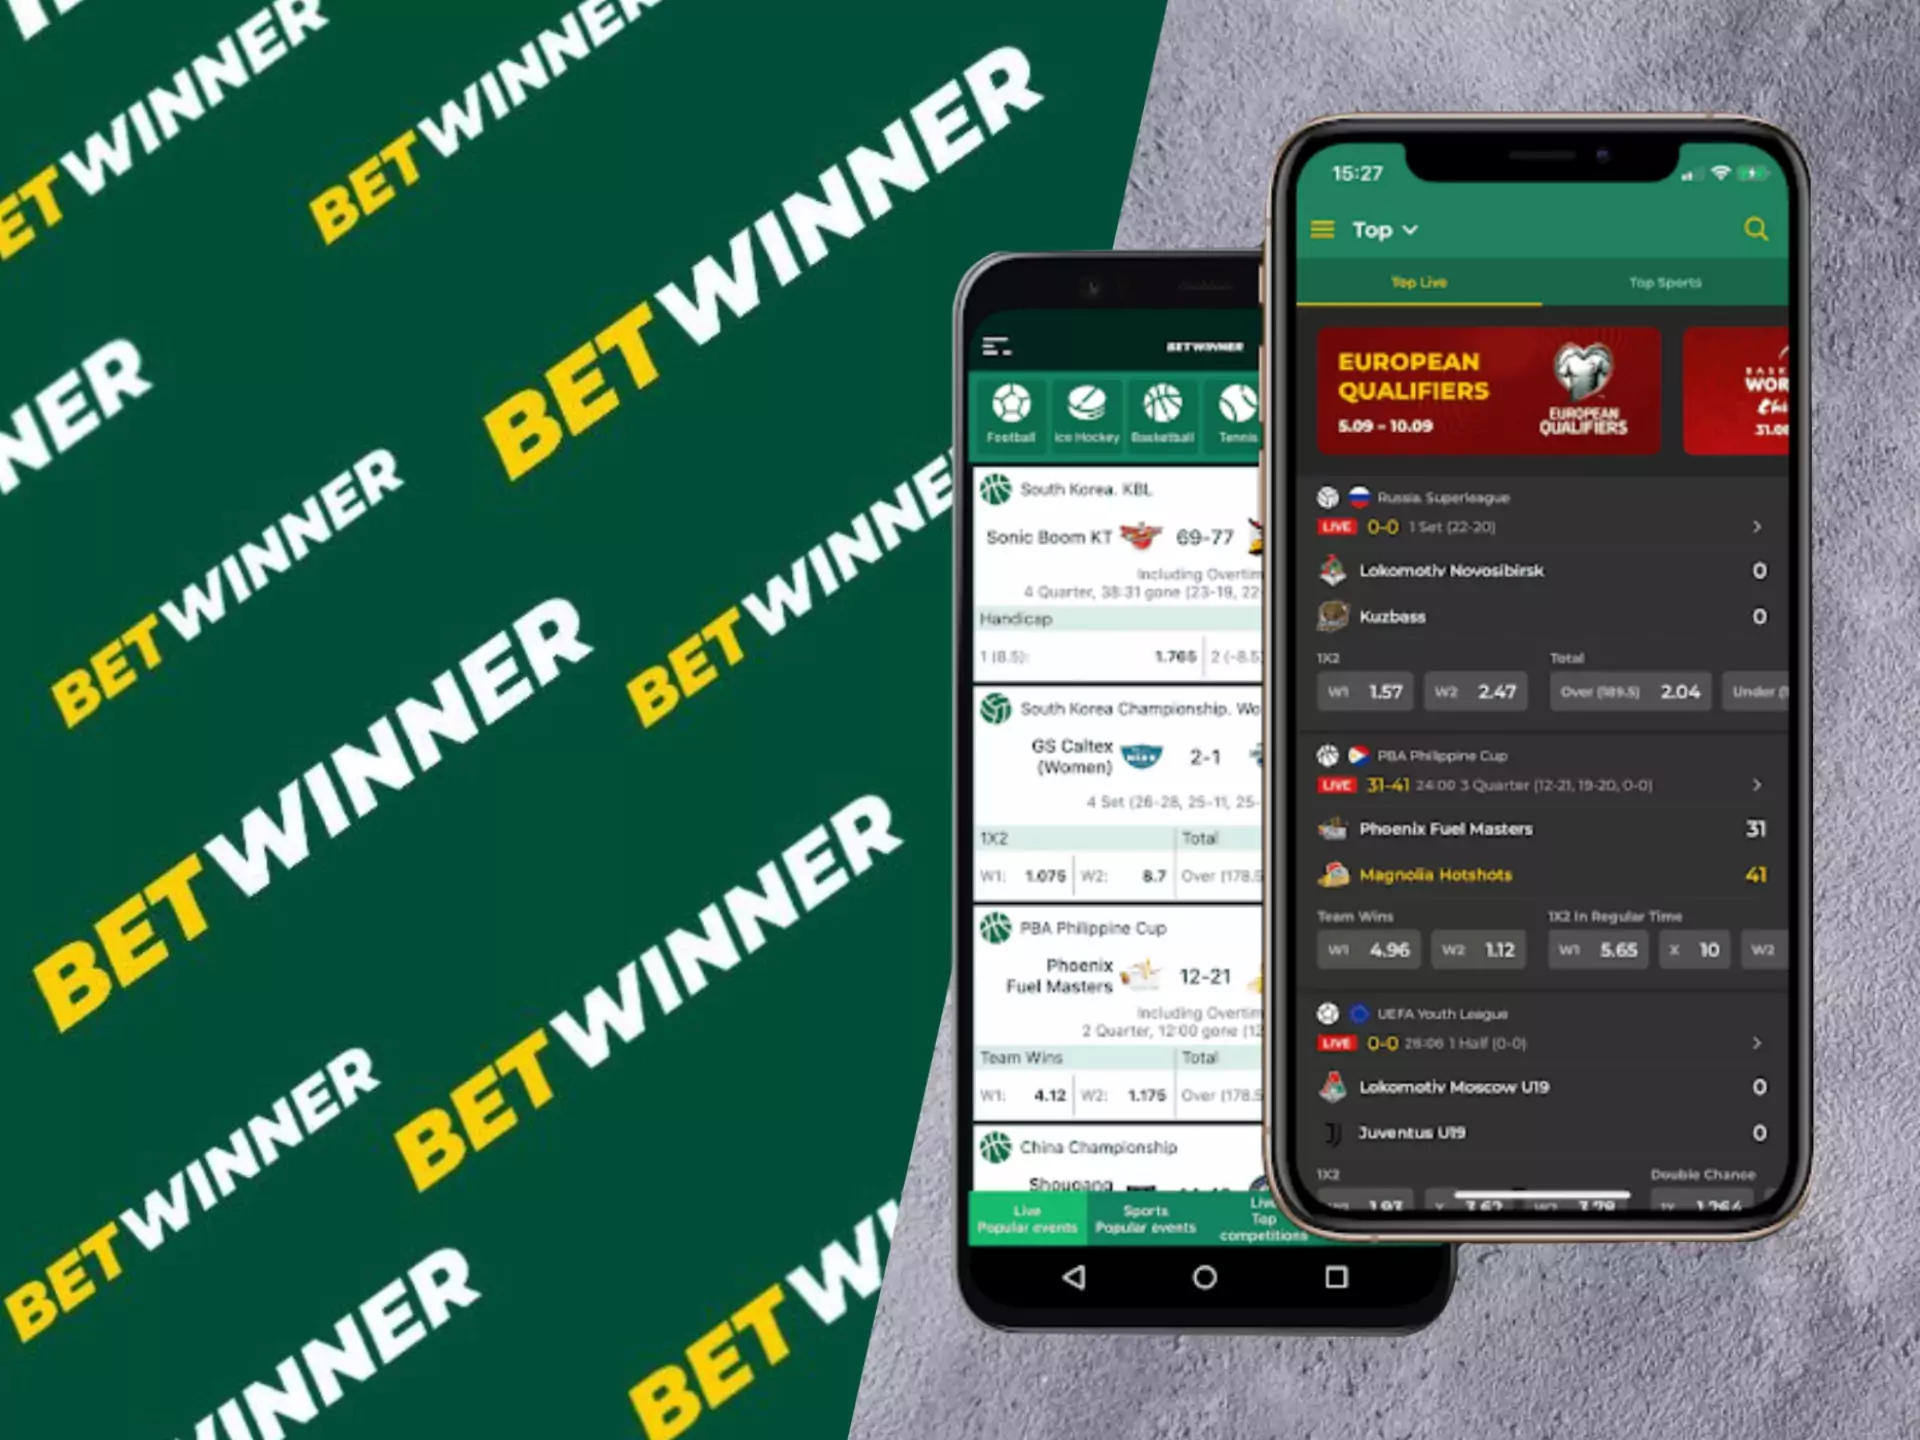 The Betwinner apps inteface is user-friendly and easy to understand.